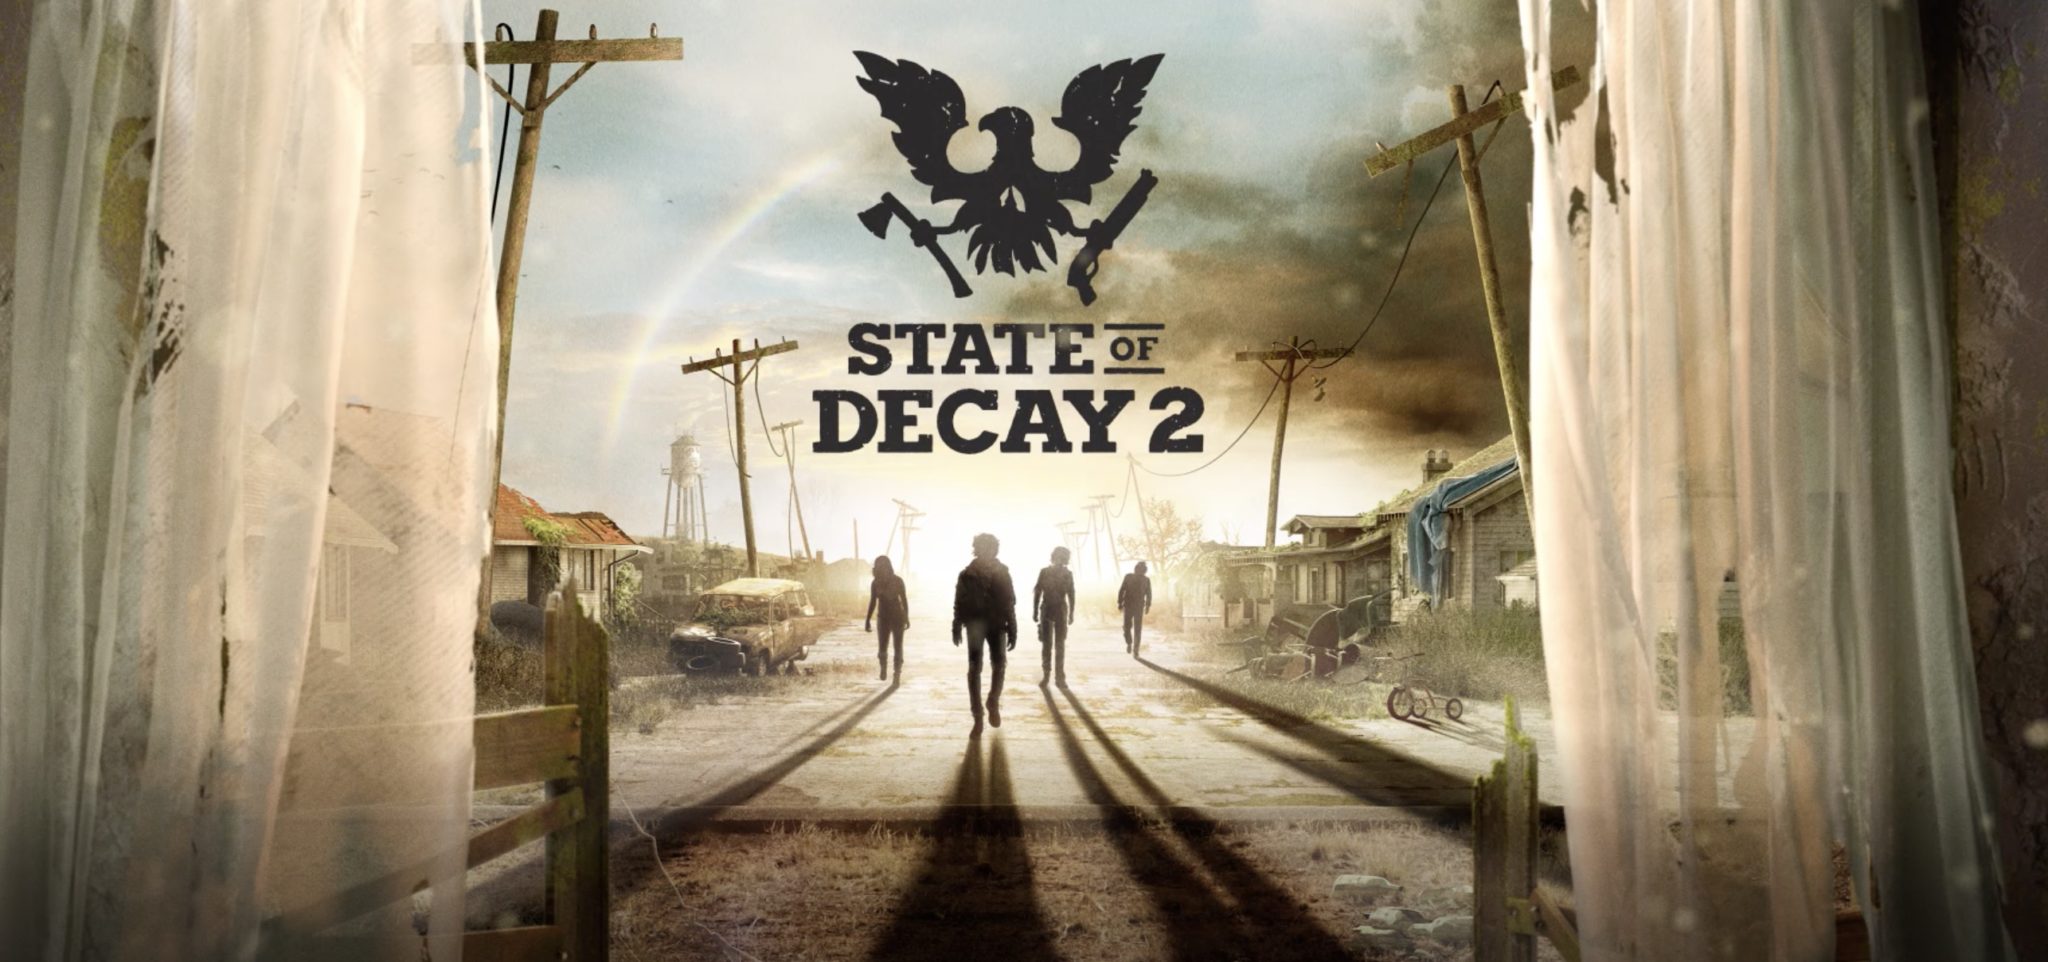 test exclu state of decay 2